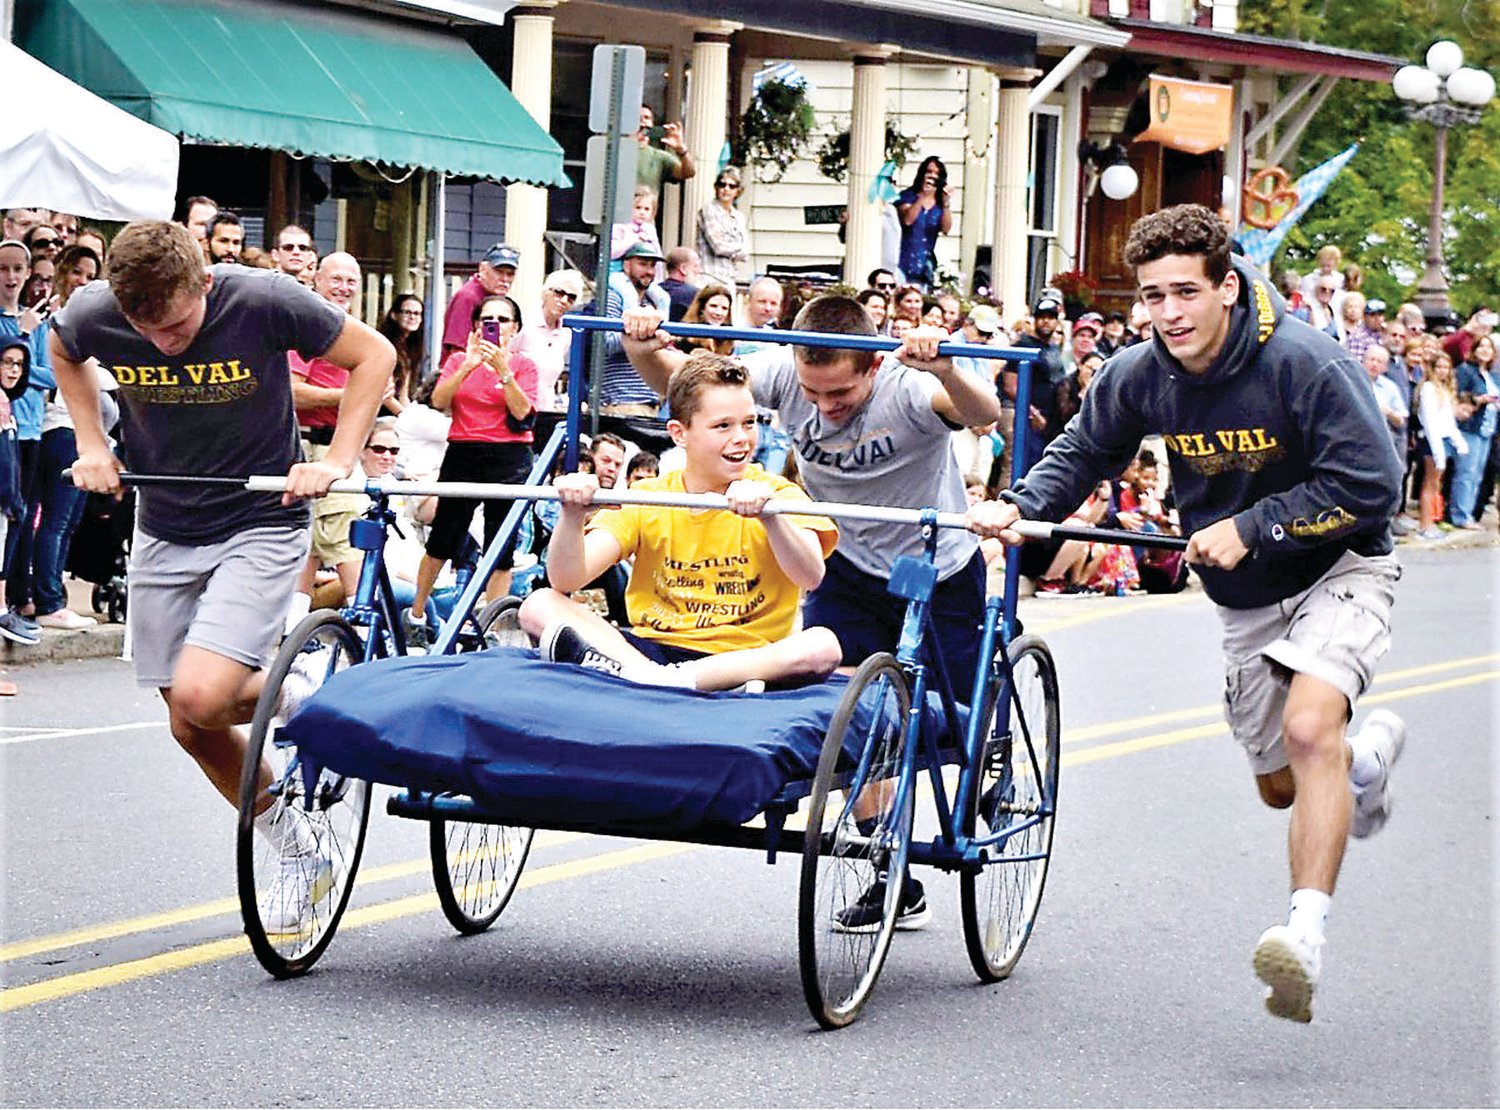 The Delaware Valley High School wrestlers had the fastest bed in the annual bed race. Photograph by student Olivia Koziel